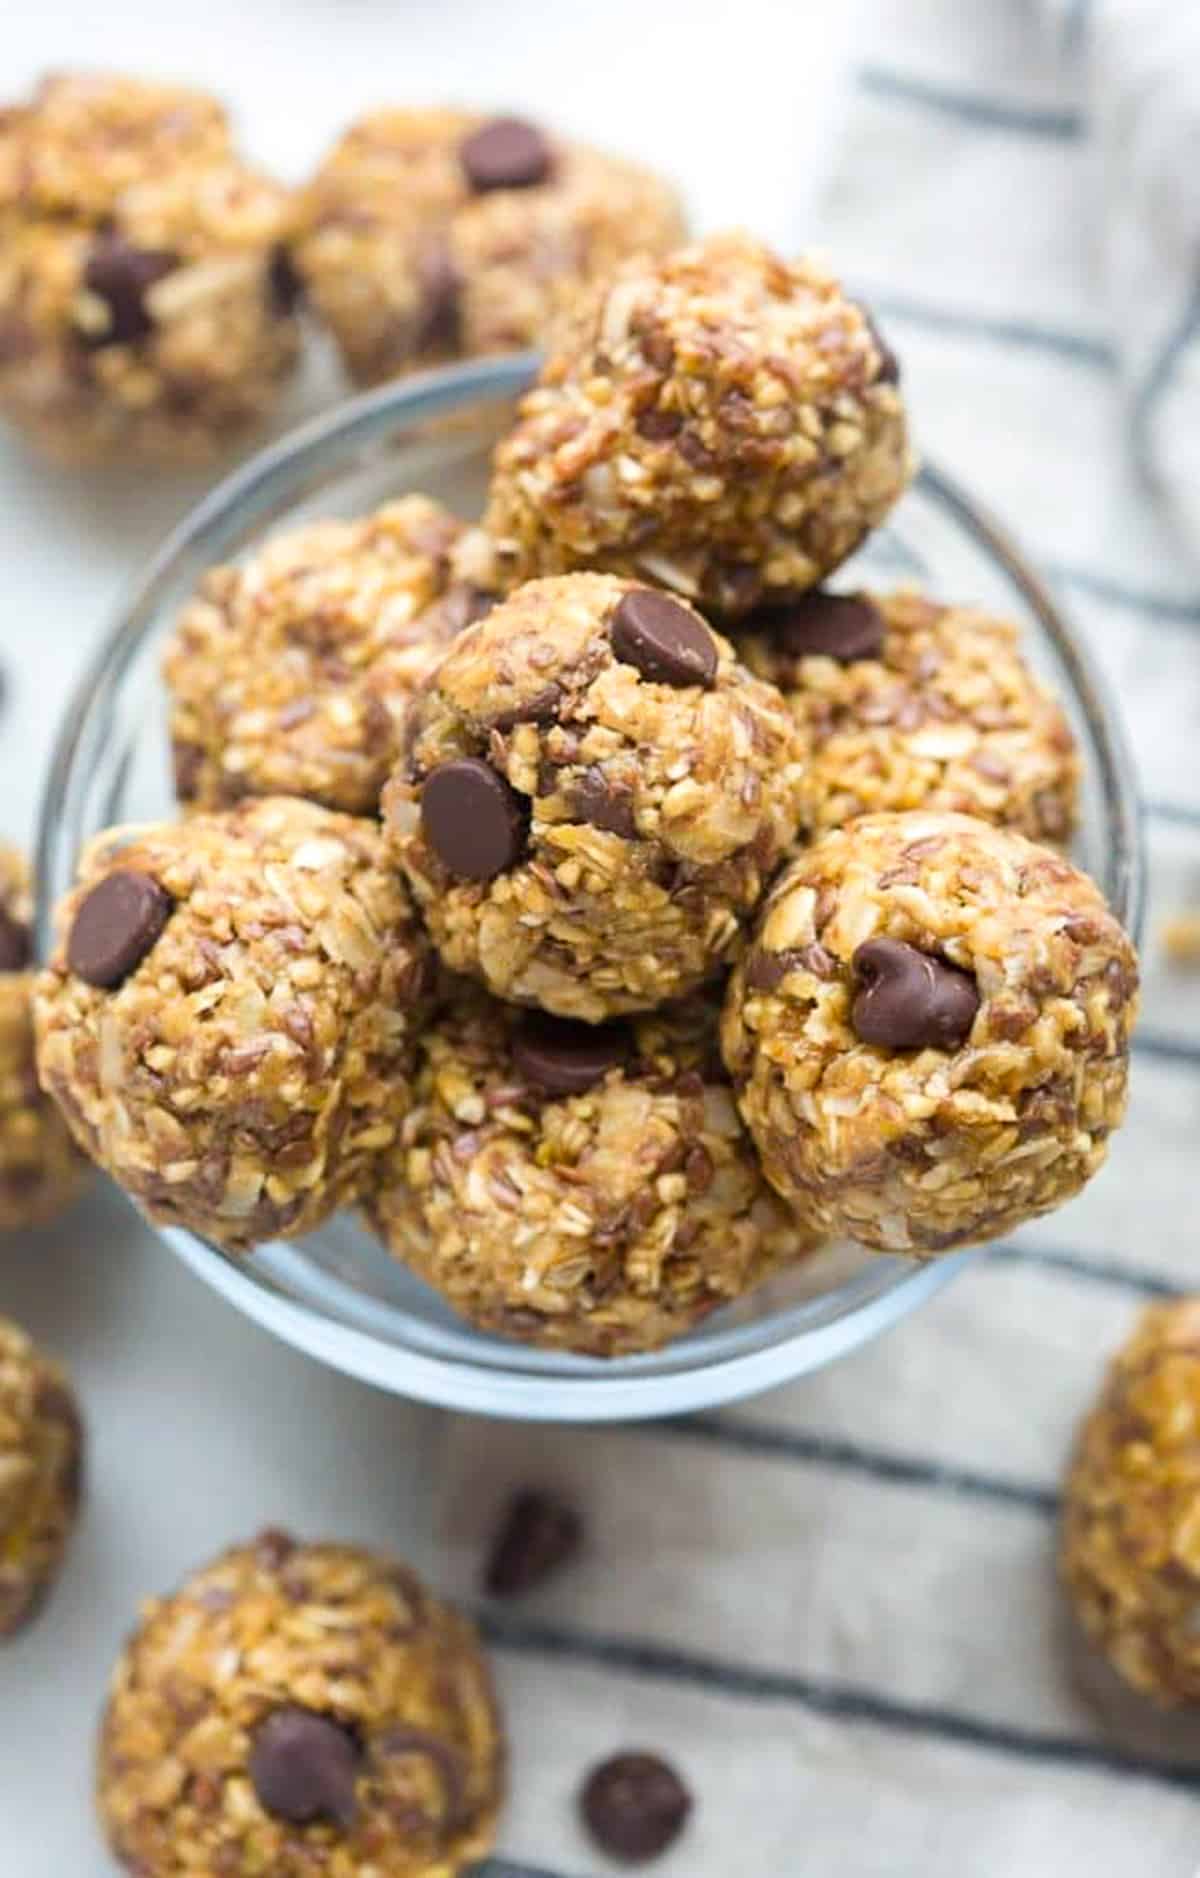 A jar filled with Energy Balls, made with oats, peanut butter, honey, chocolate chips, and coconut.